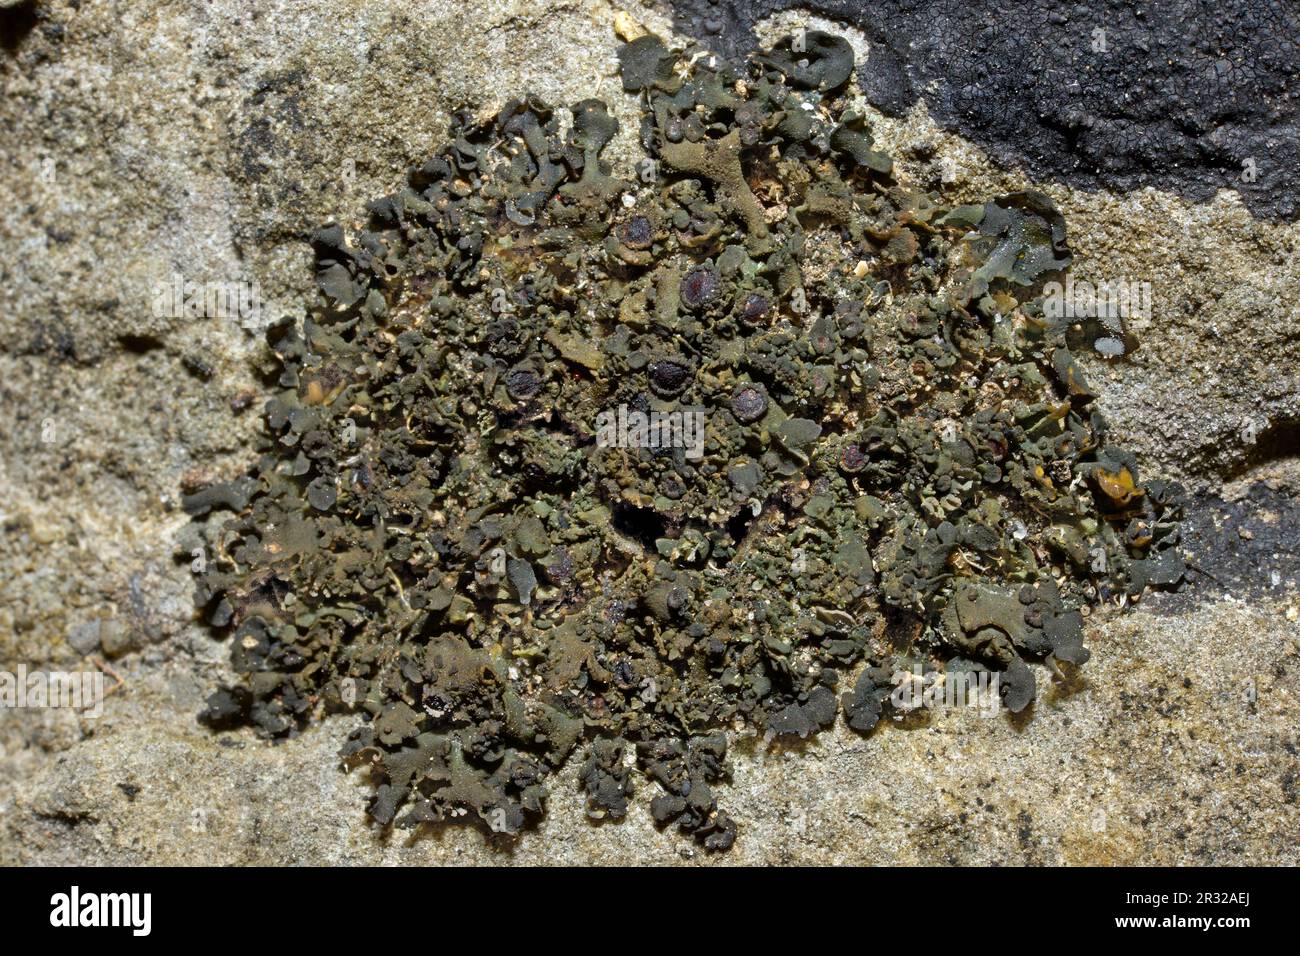 Lathagrium cristatum is foliose, jelly lichen found on limestone. It occurs throughout the northern hemisphere. Stock Photo